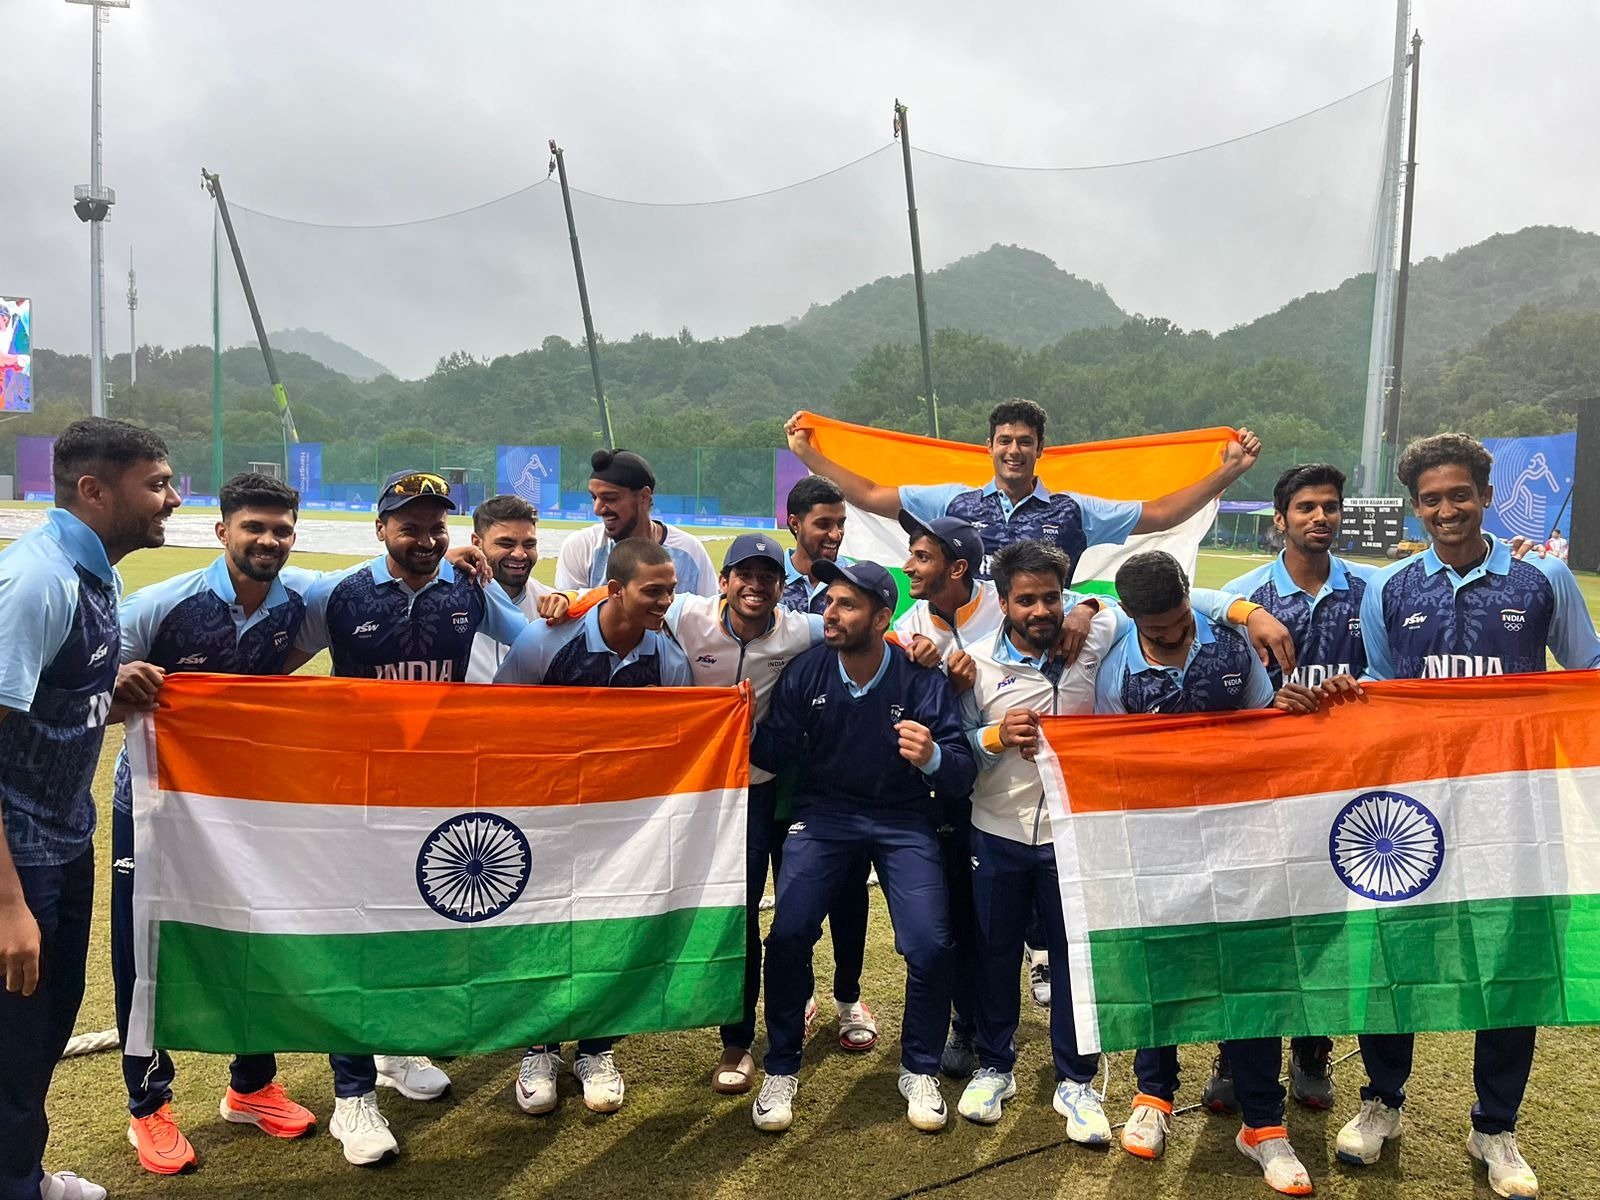 A happy Indian team after the gold win